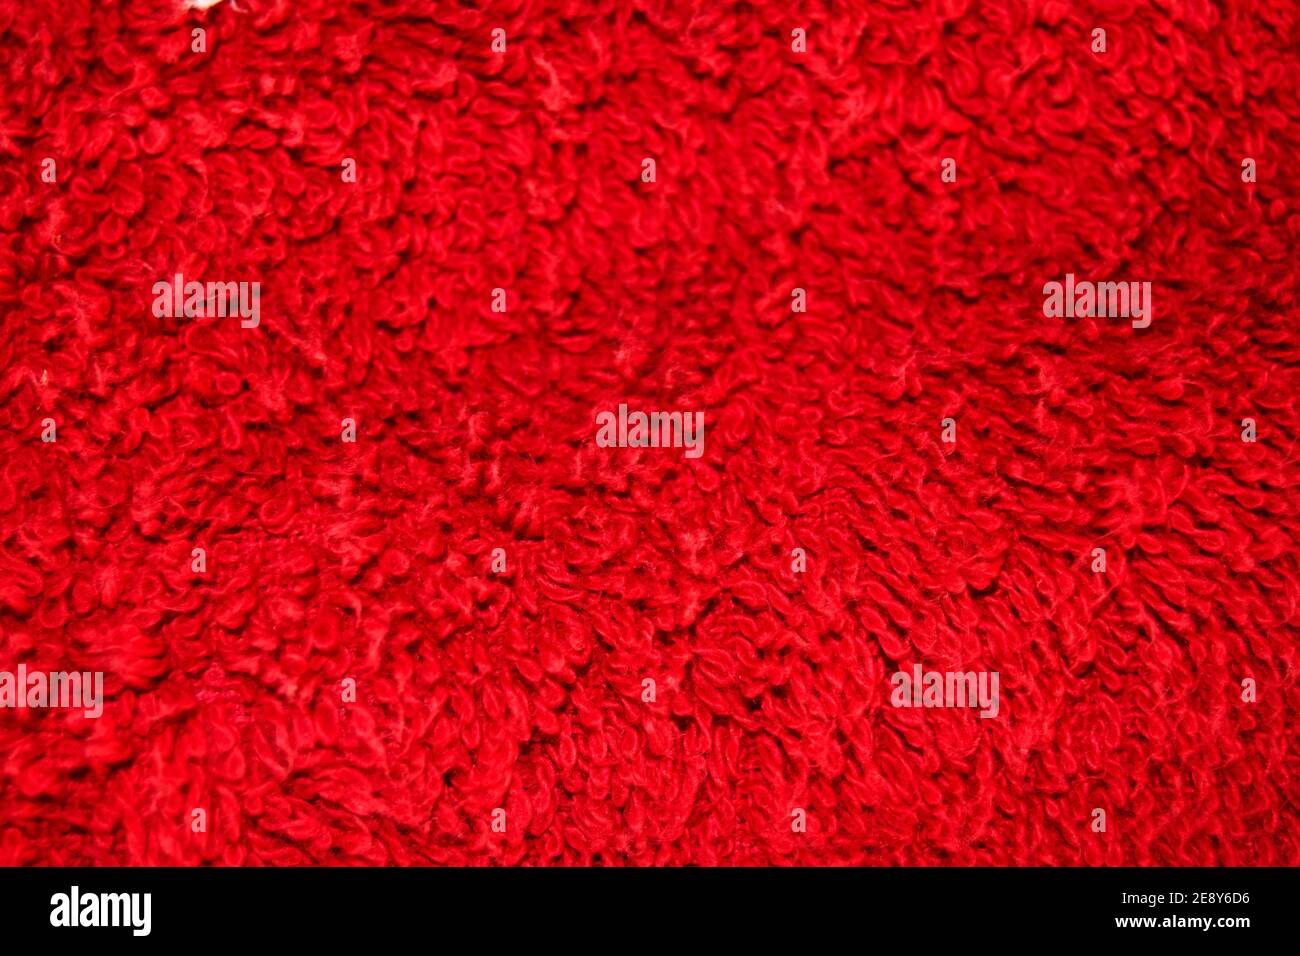 Red carpet background and texture. Design element. Stock Photo